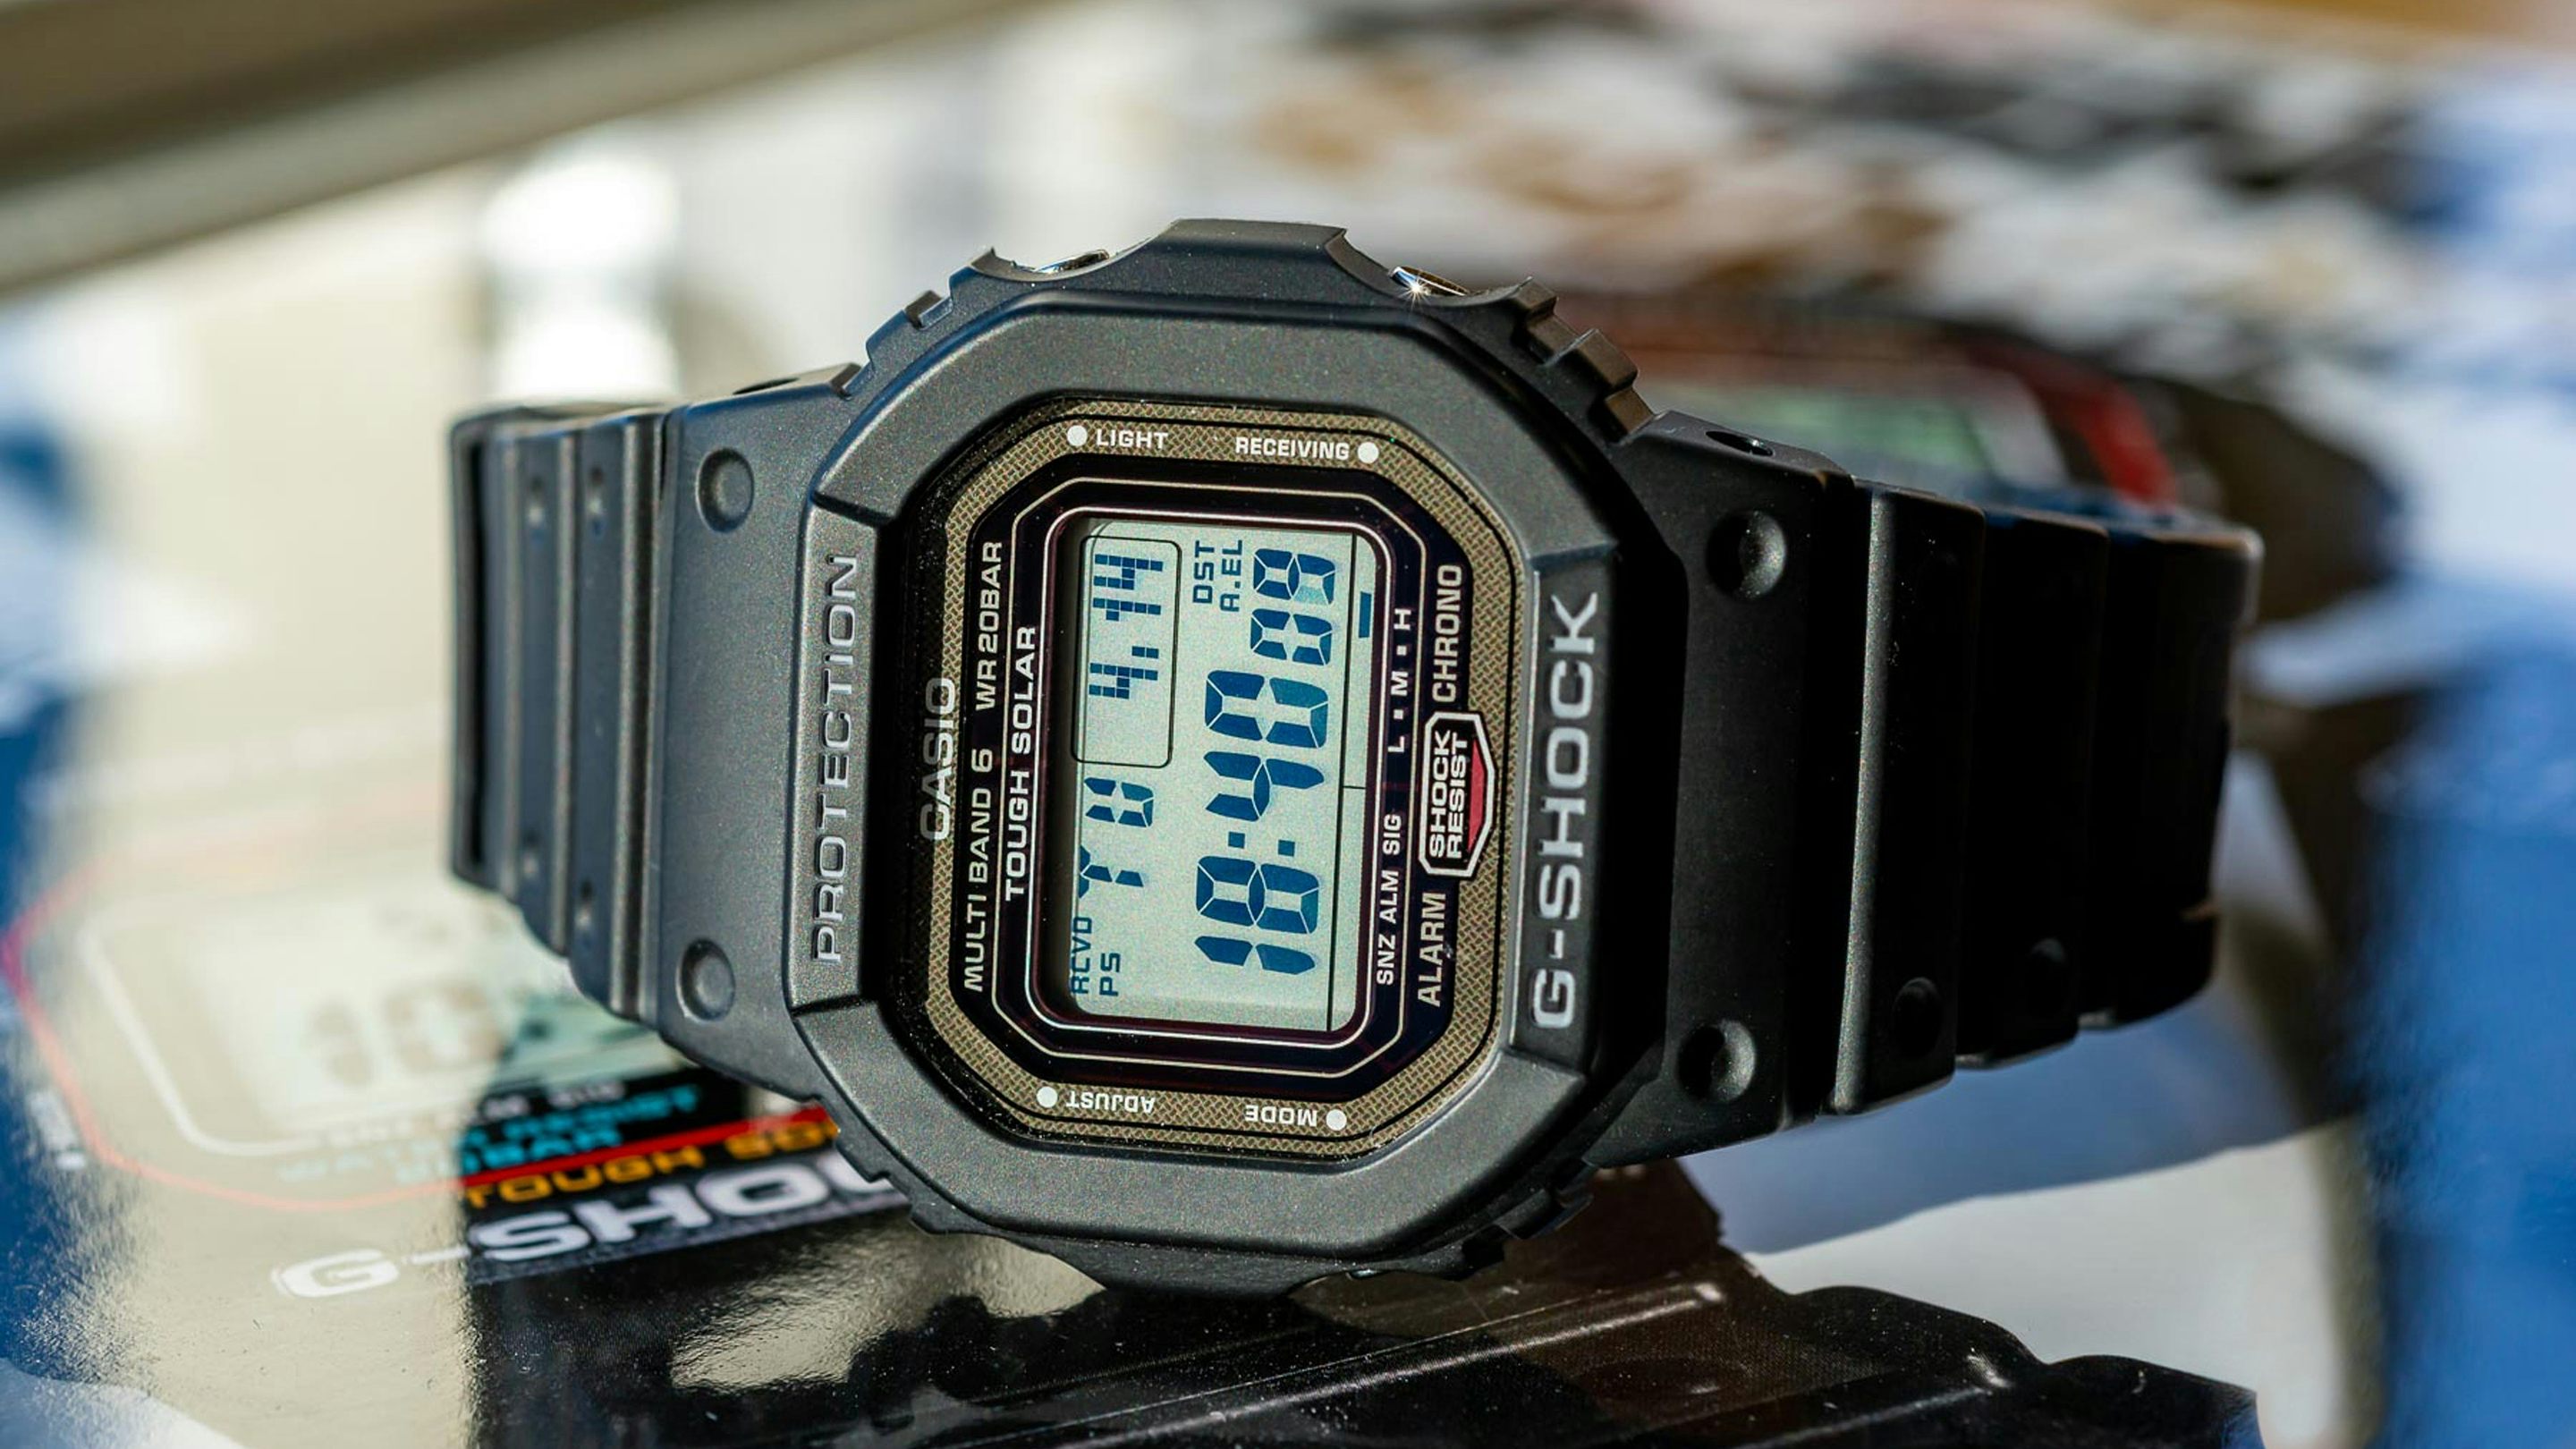 Best of Watchville: The Starter\'s Fratello - To G-Shock, Hodinkee From A Guide Square